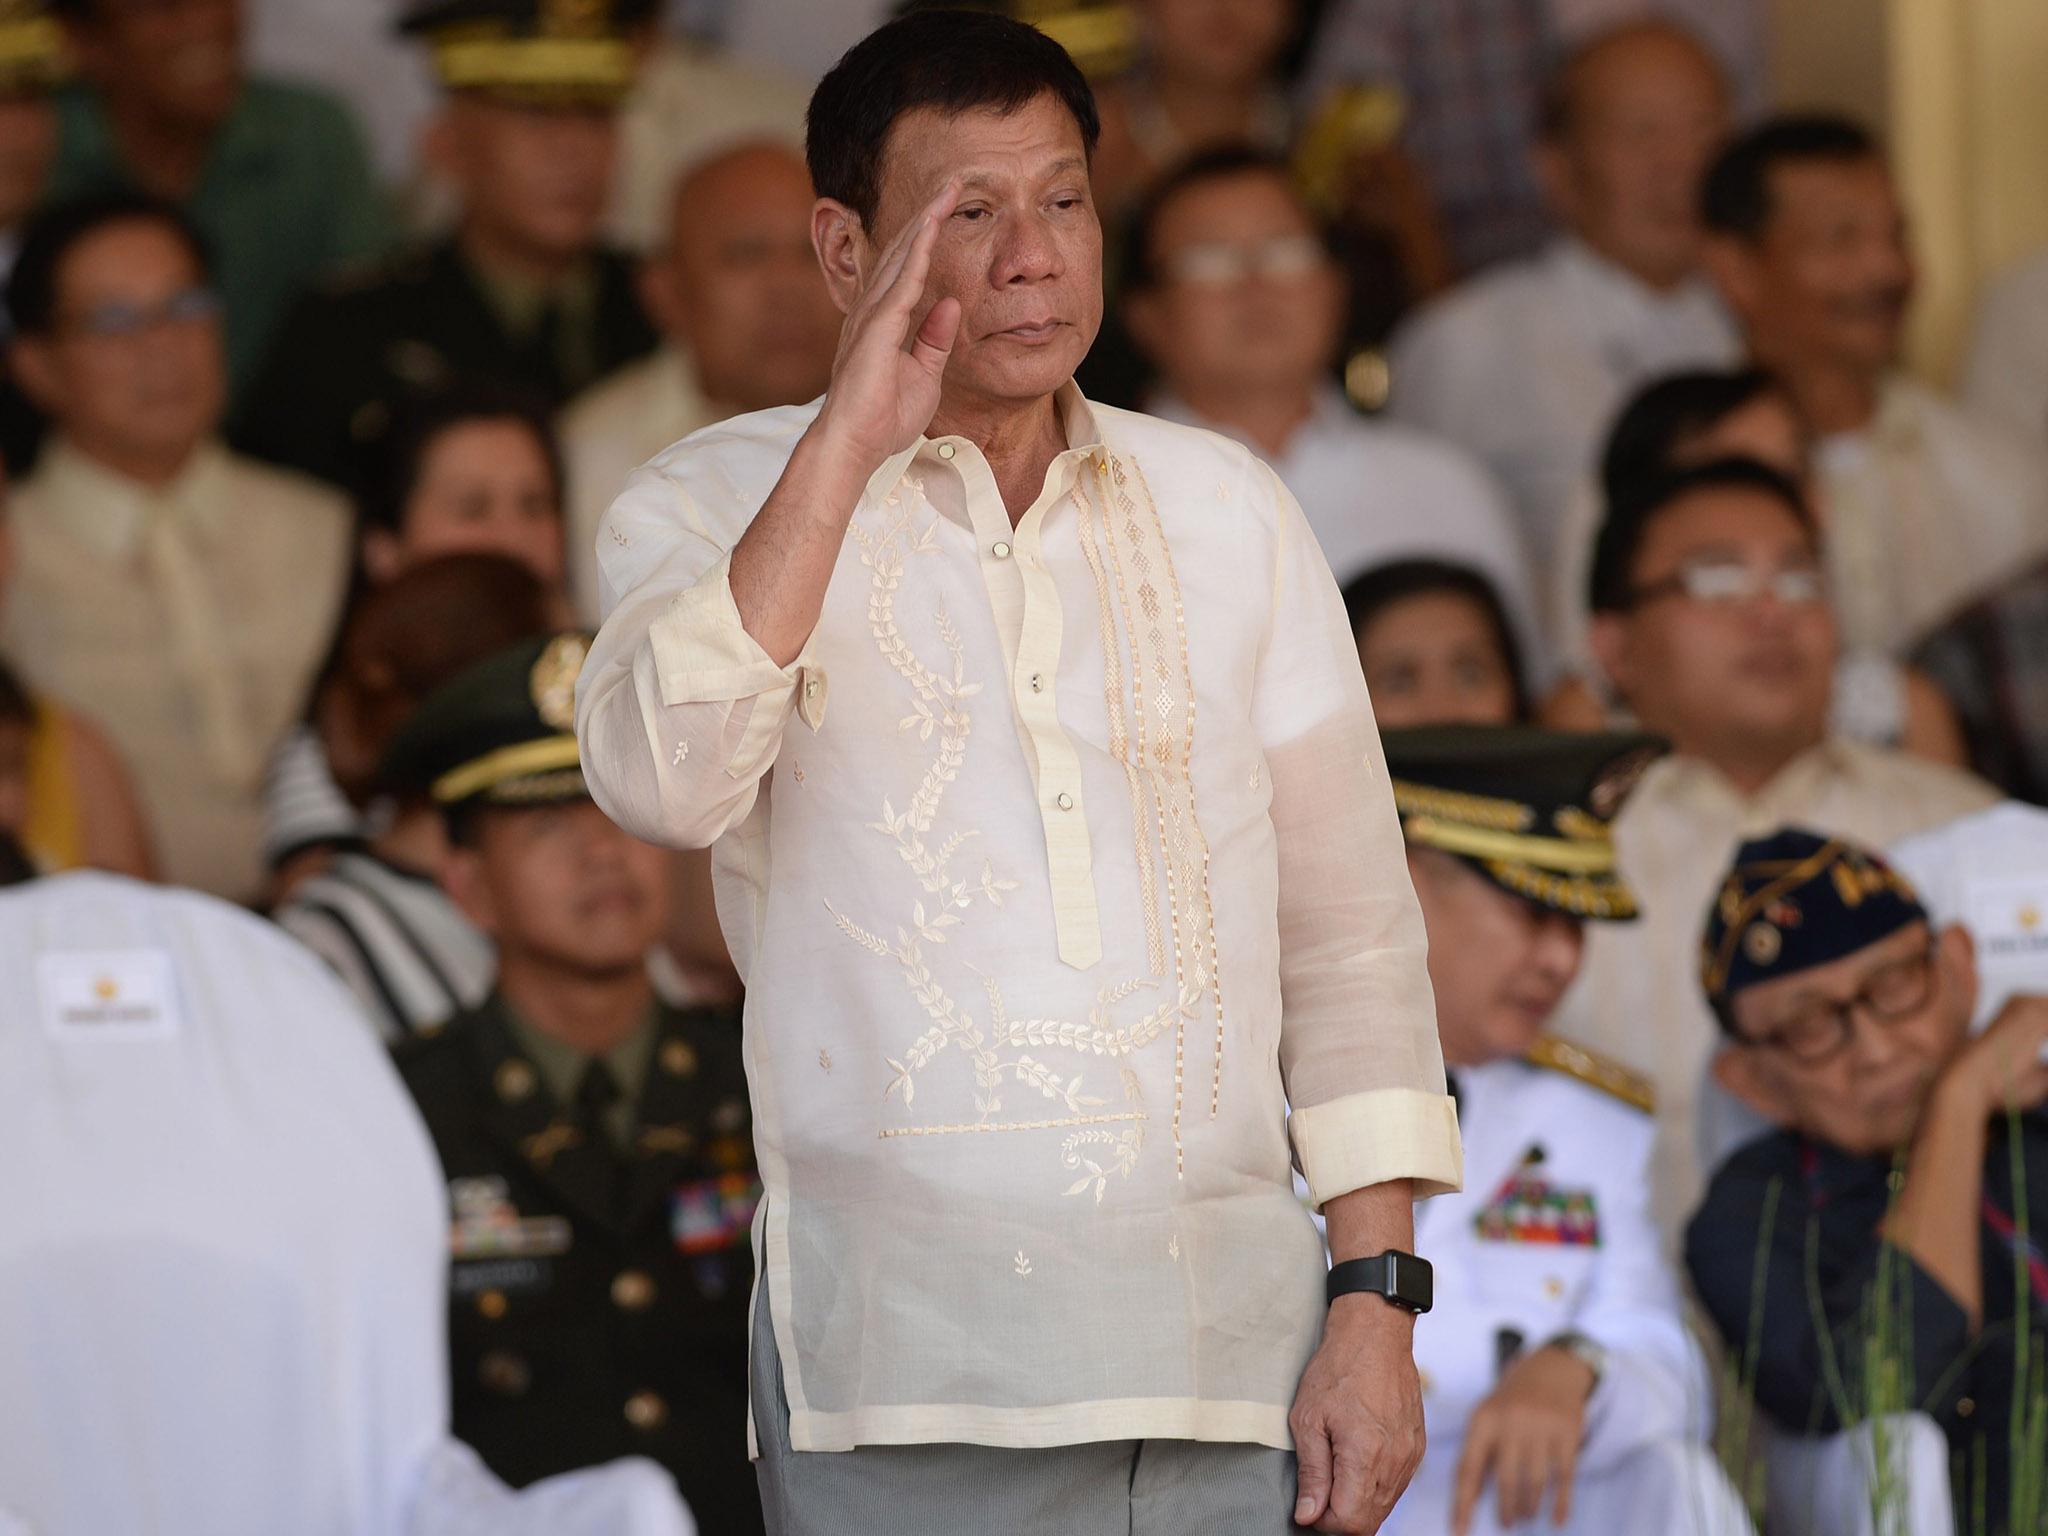 Rodrigo Duterte was sworn in as the Philippines president in June after running a bombastic campaign that drew comparisons with Donald Trump